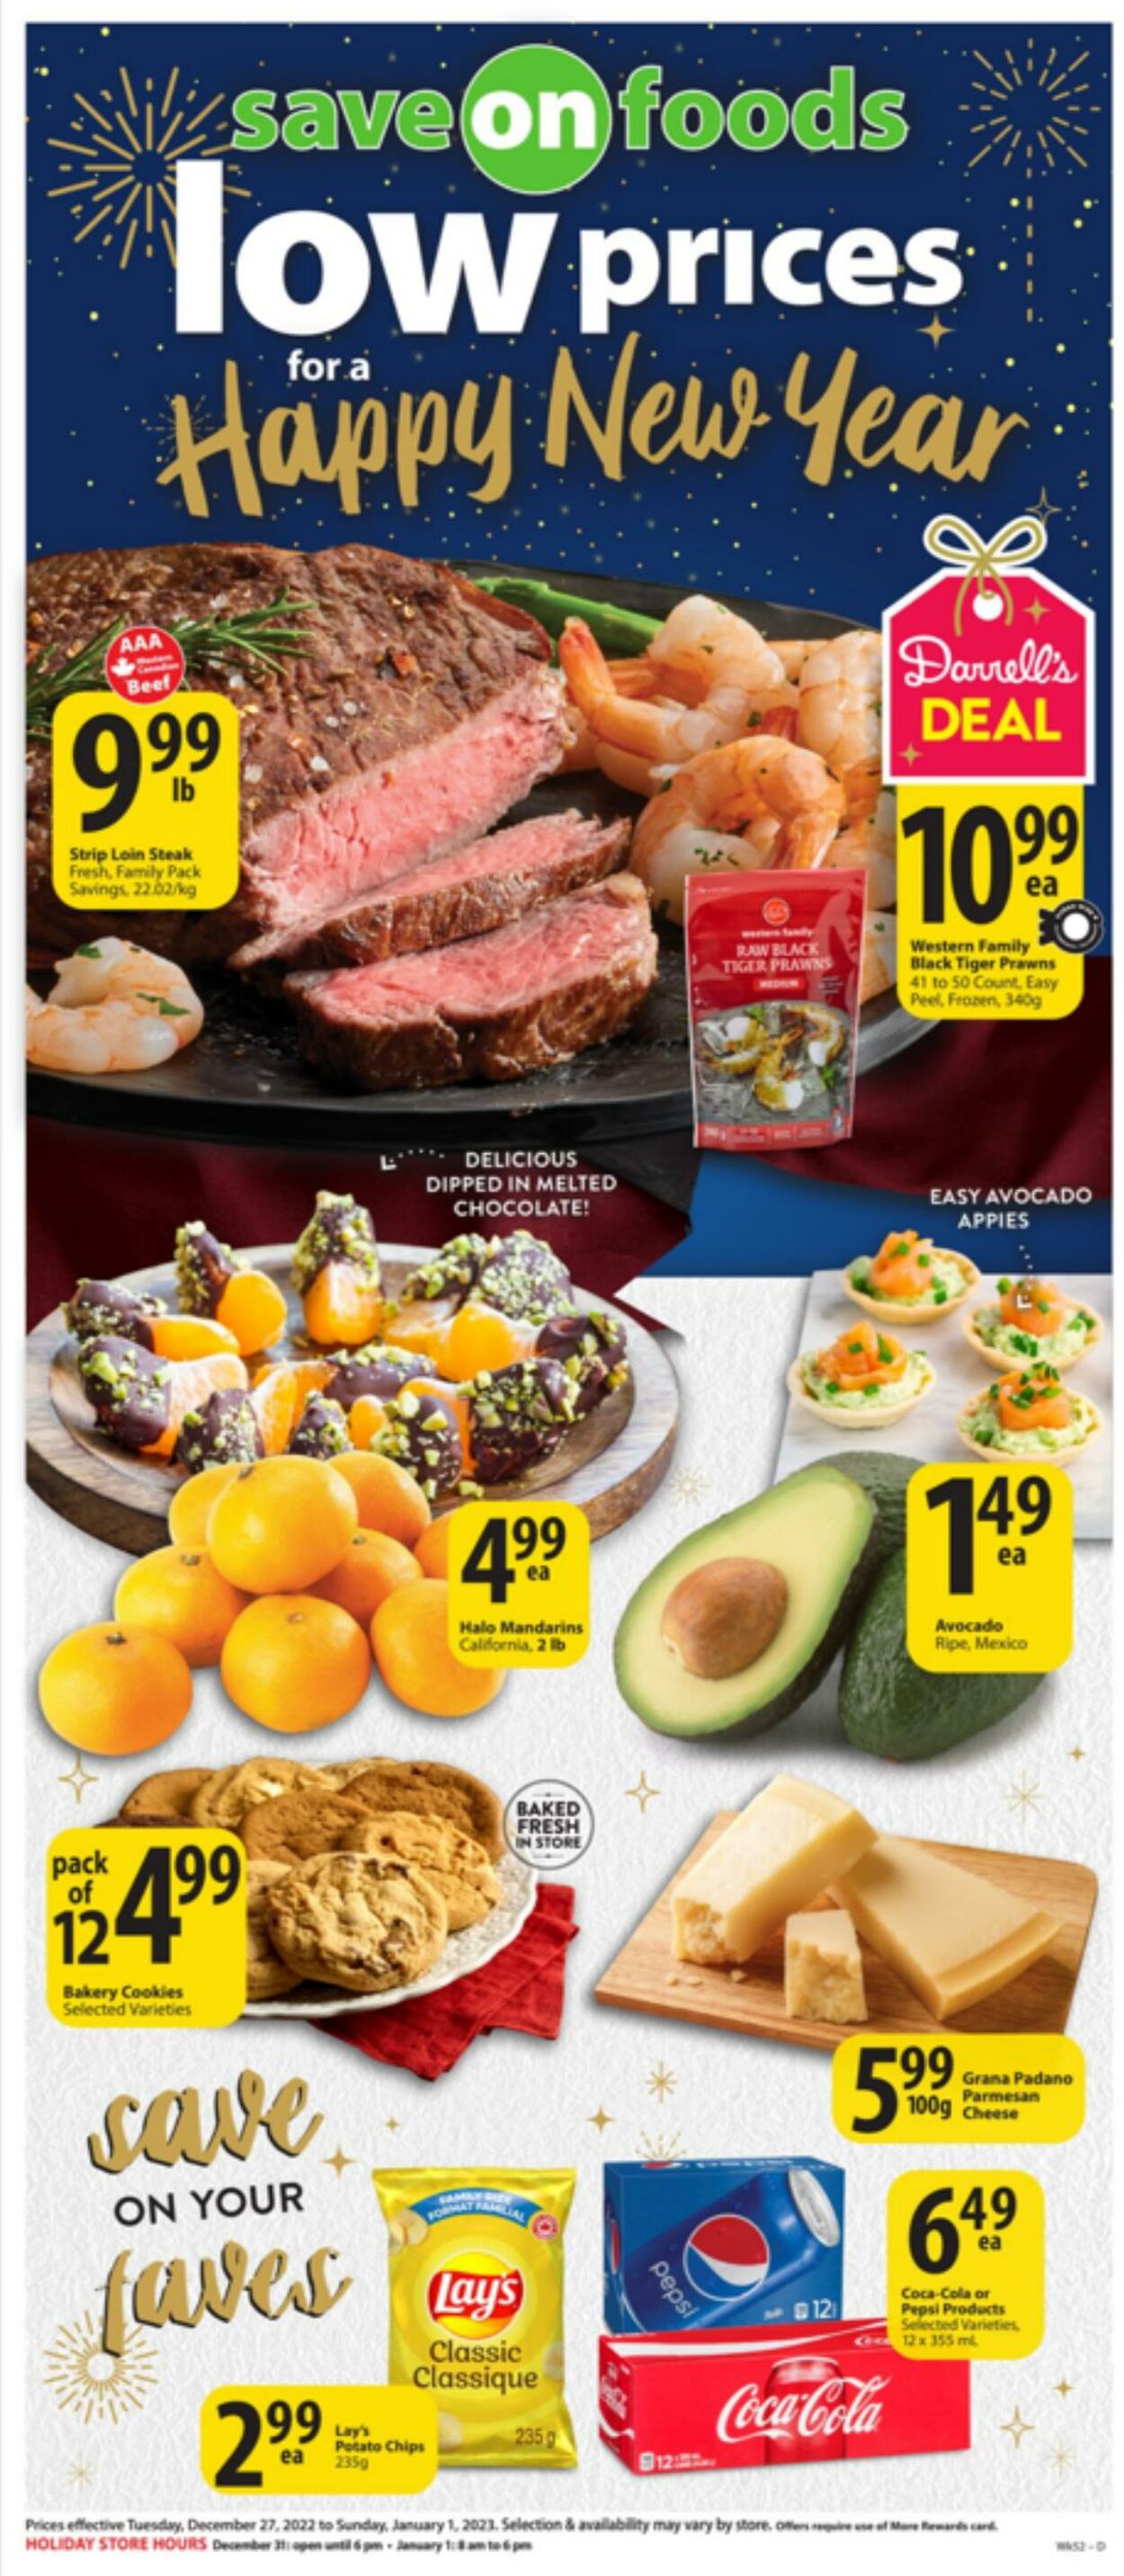 Flyer Save-On-Foods 27.12.2022-01.01.2023